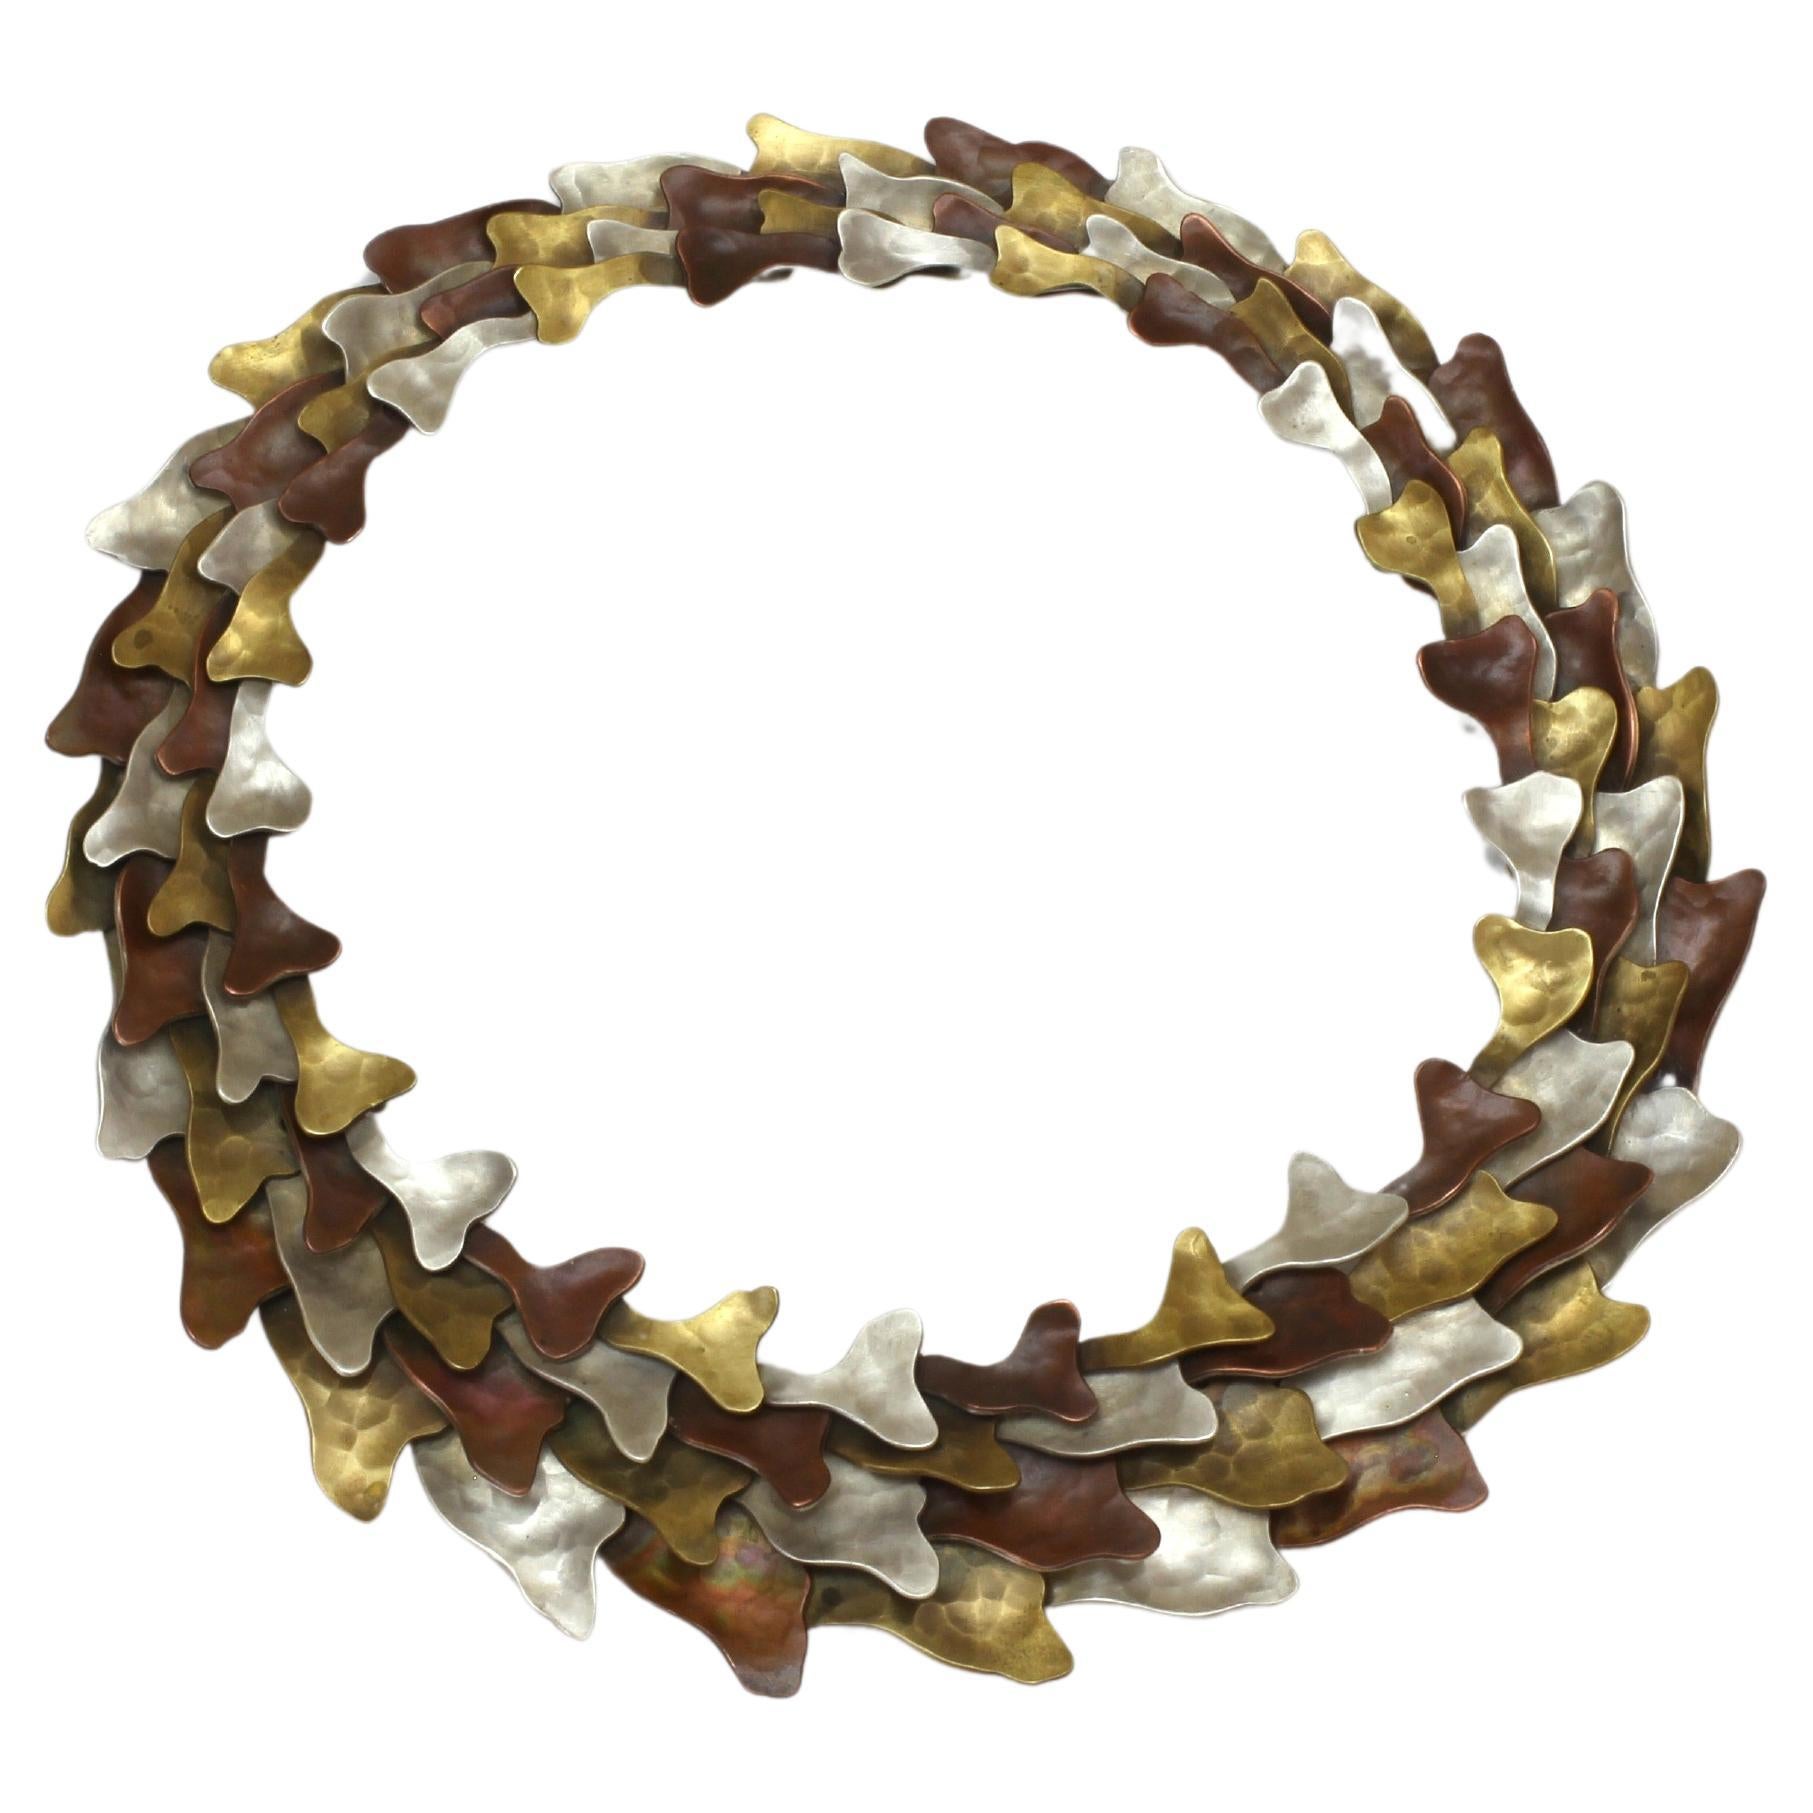 "Toloache" Handmade Statement Necklace in Mixed Metals by Eduardo Herrera For Sale